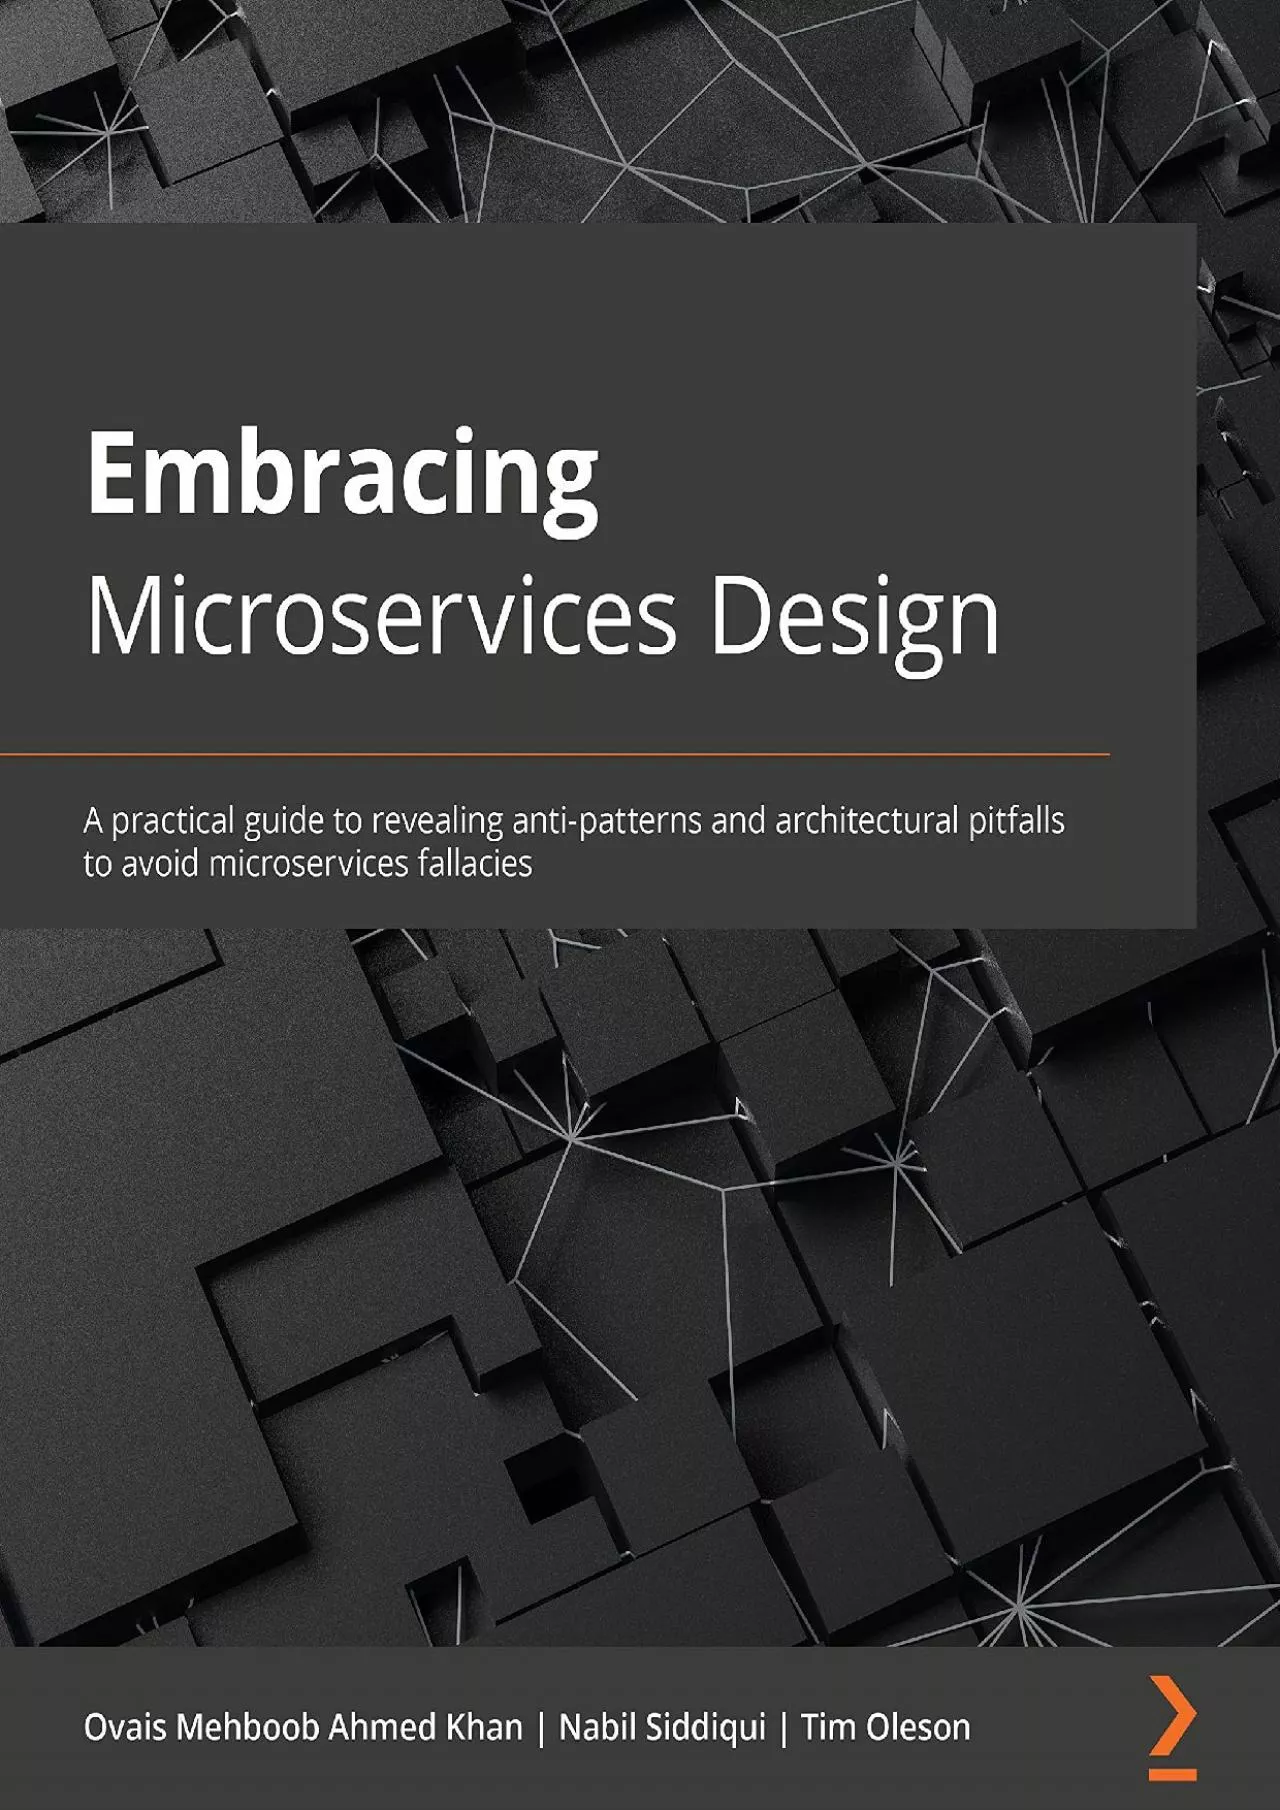 Embracing Microservices Design: A practical guide to revealing anti-patterns and architectural